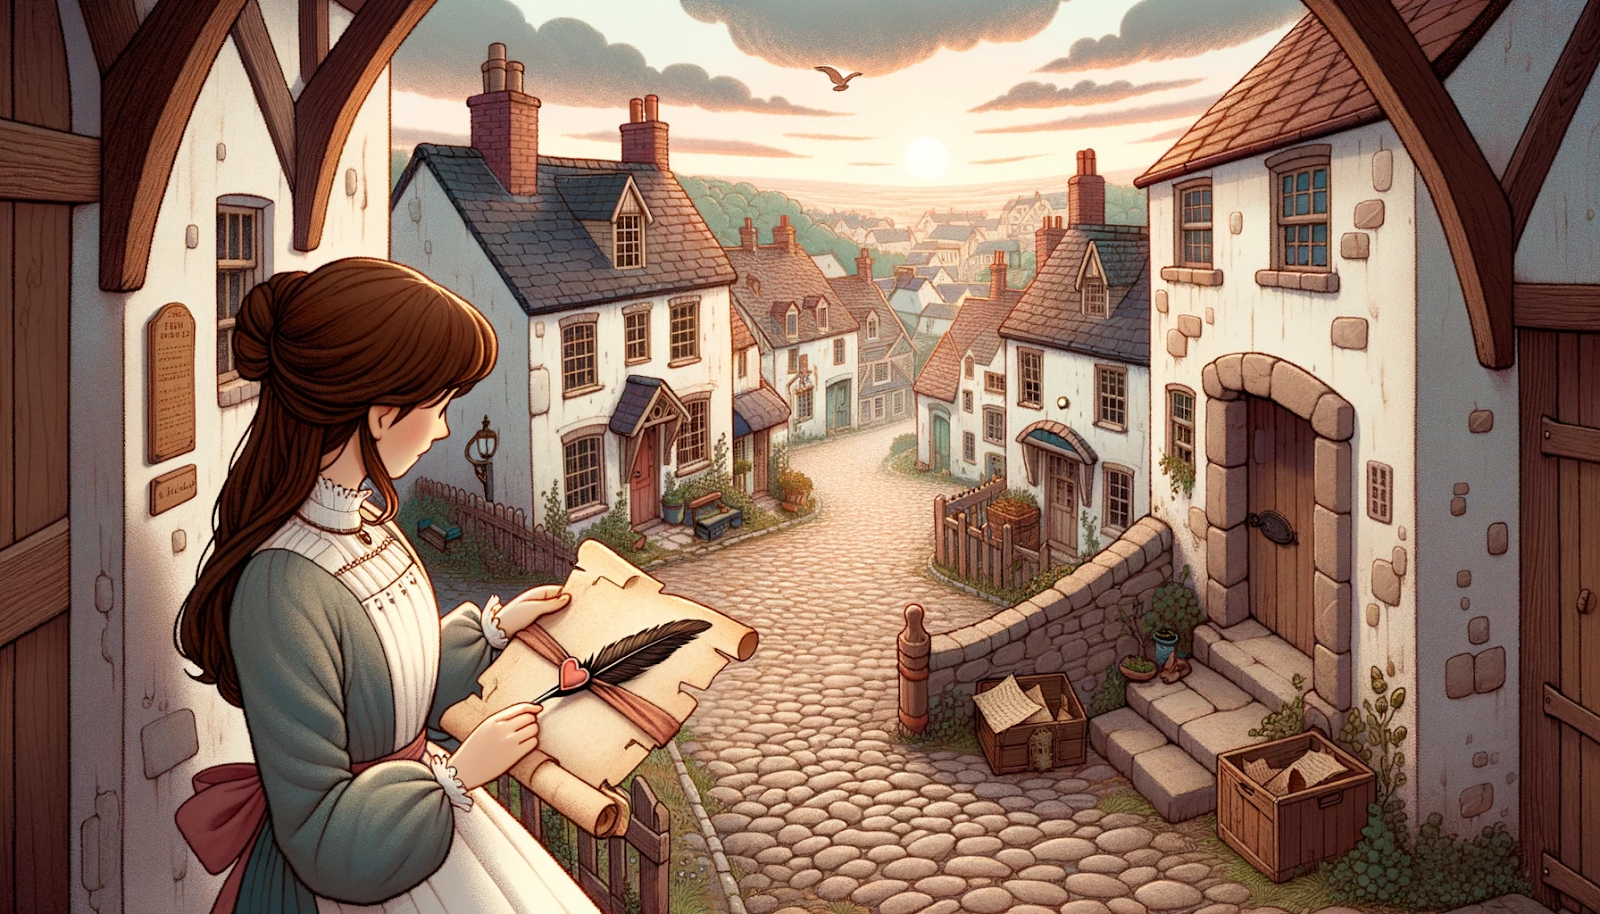 Illustration of a quaint town with cobblestone streets winding around old buildings and forgotten alleyways. Erin, a young woman with brown hair, stands outside her home, holding a worn parchment with a feathered quill and heart seal. The setting sun casts a warm glow on the scene.